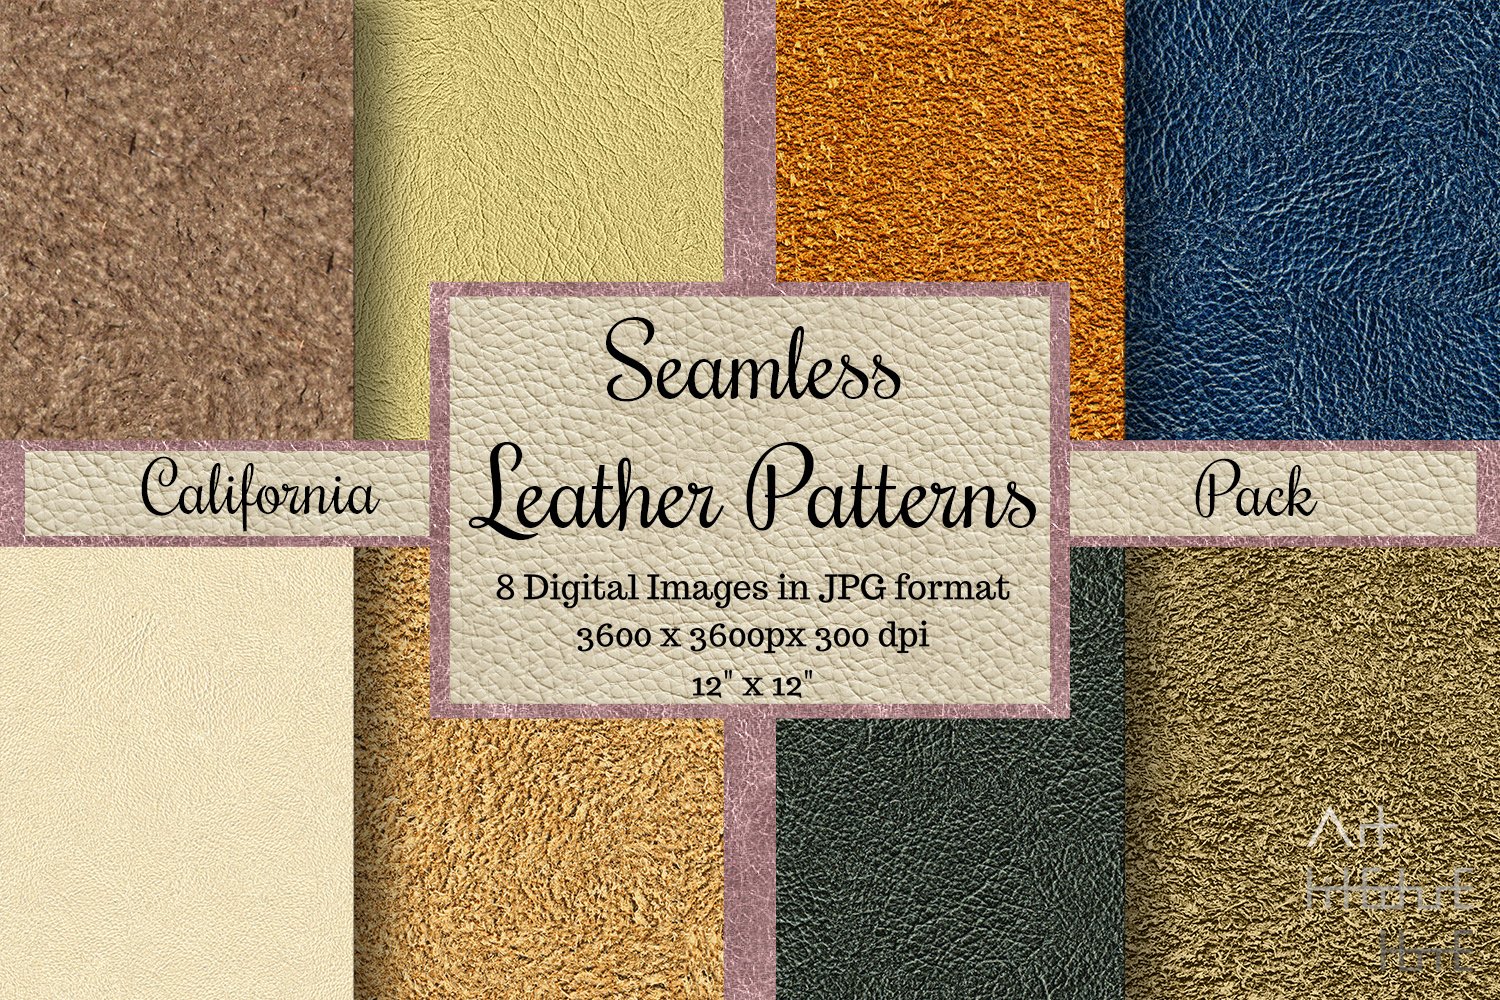 Seamless Leather Patterns California cover image.